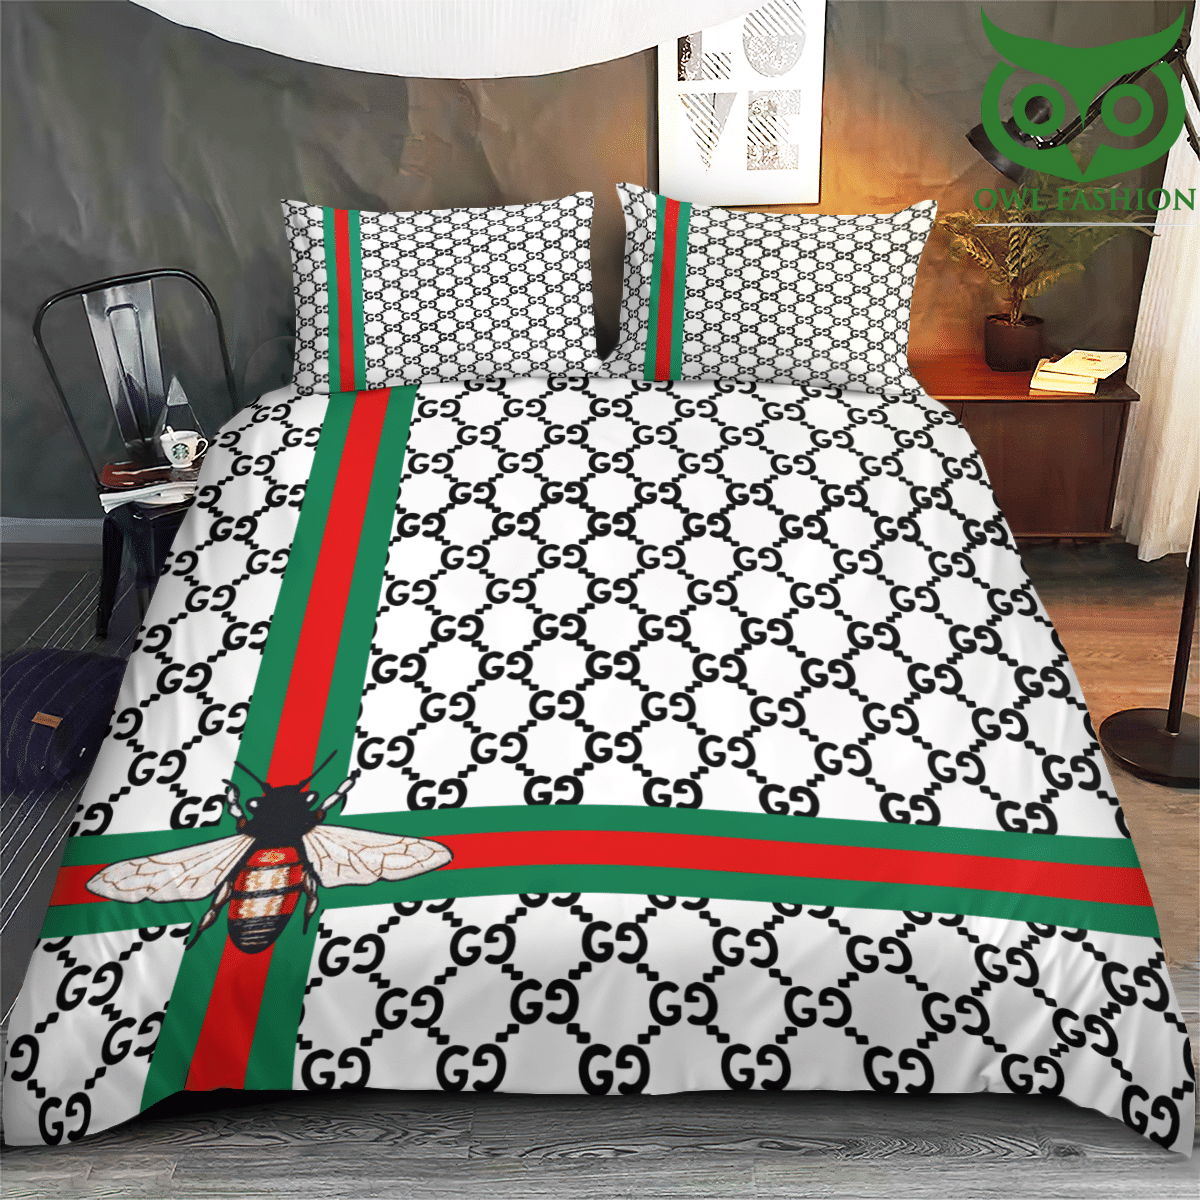 29 Gucci Bee Red Green luxury bedding set